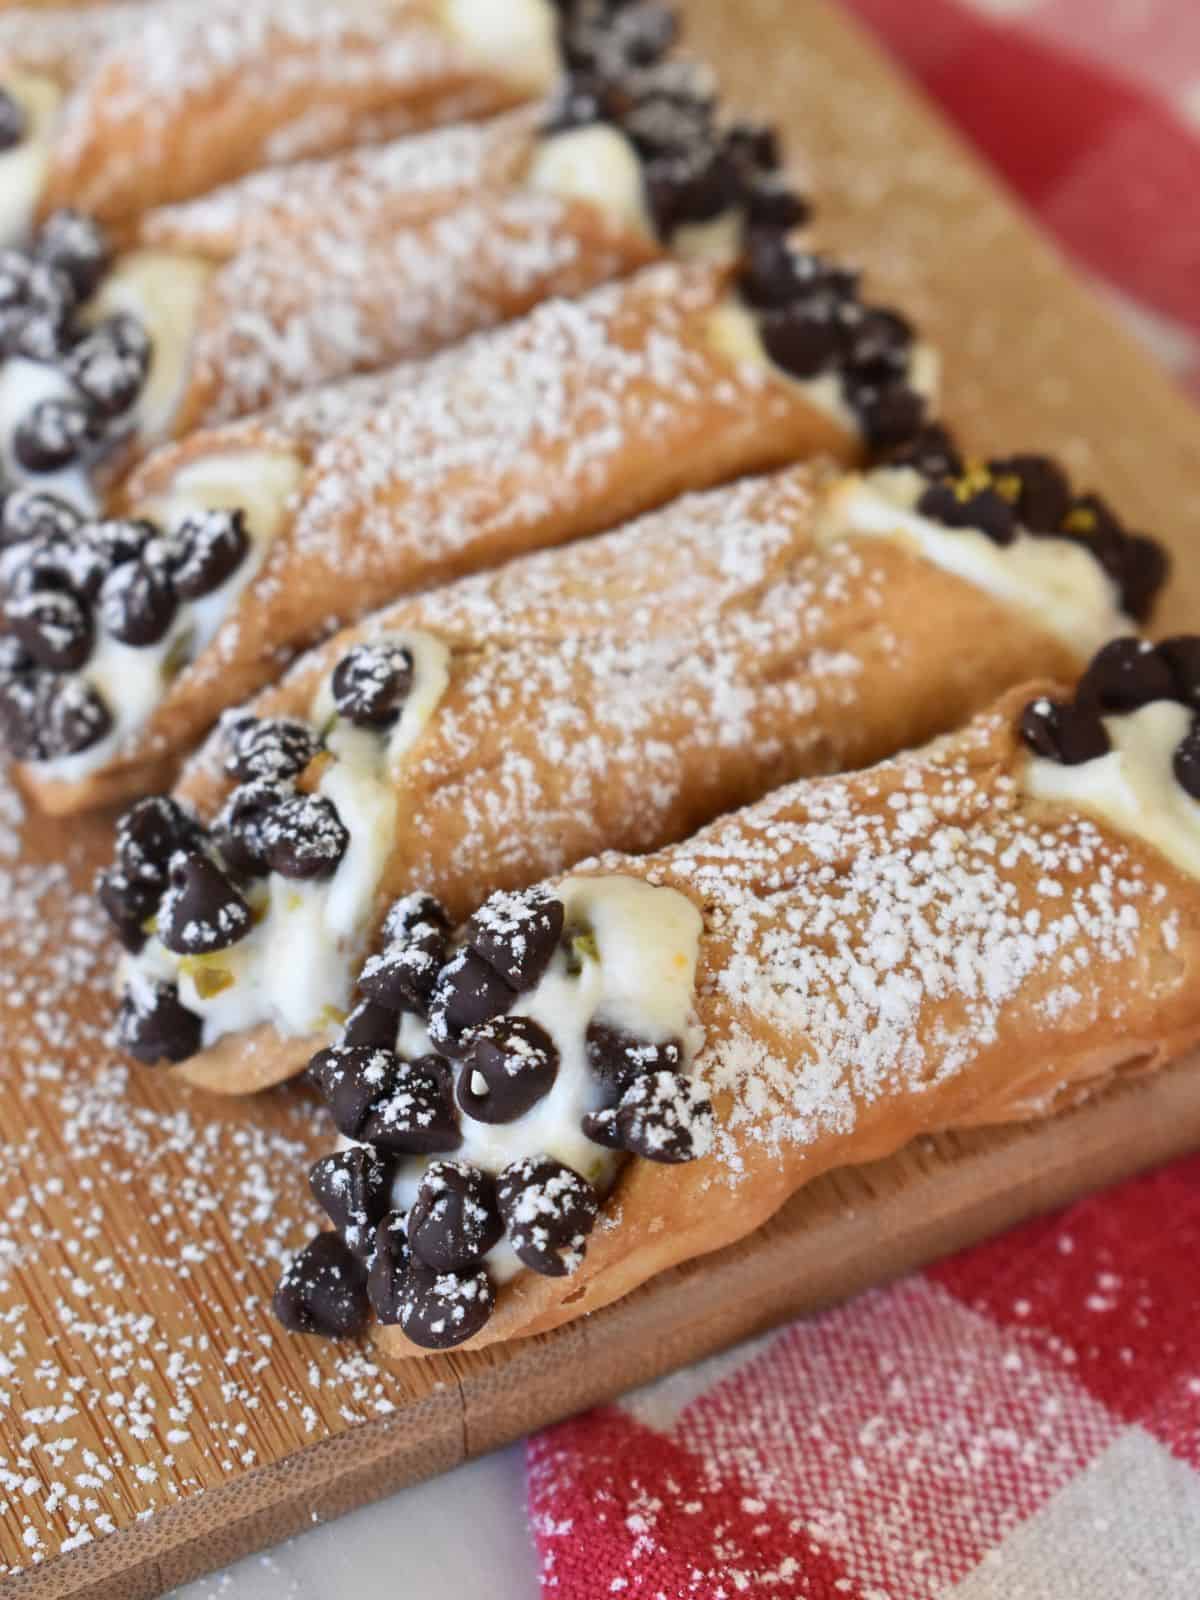 Ricotta Cannolis lined up on a wood board with a checkered napkin underneath.